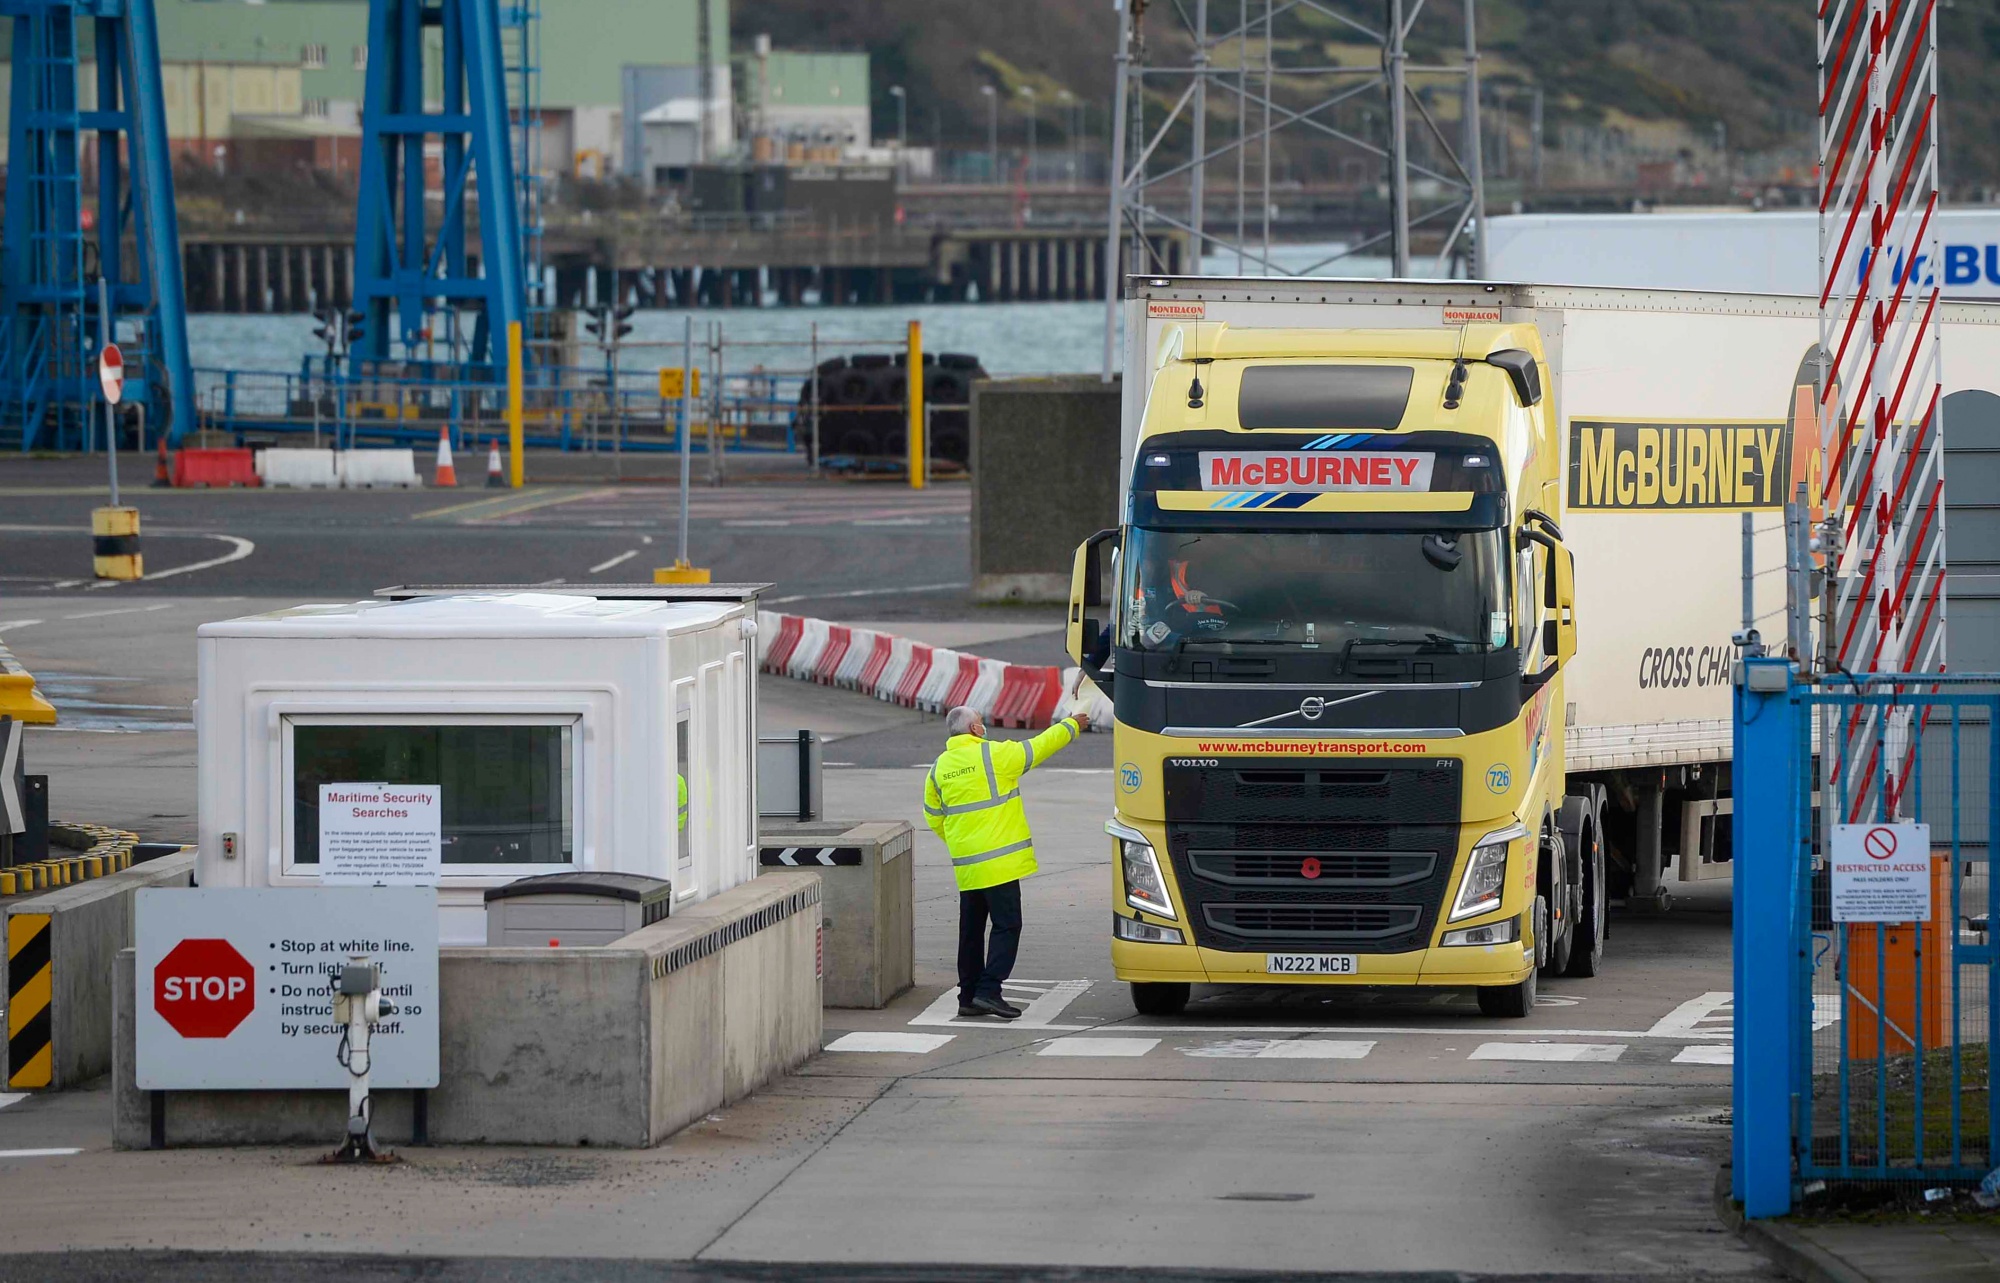 Trucks go through security at the Port of Larne in Northern Ireland.